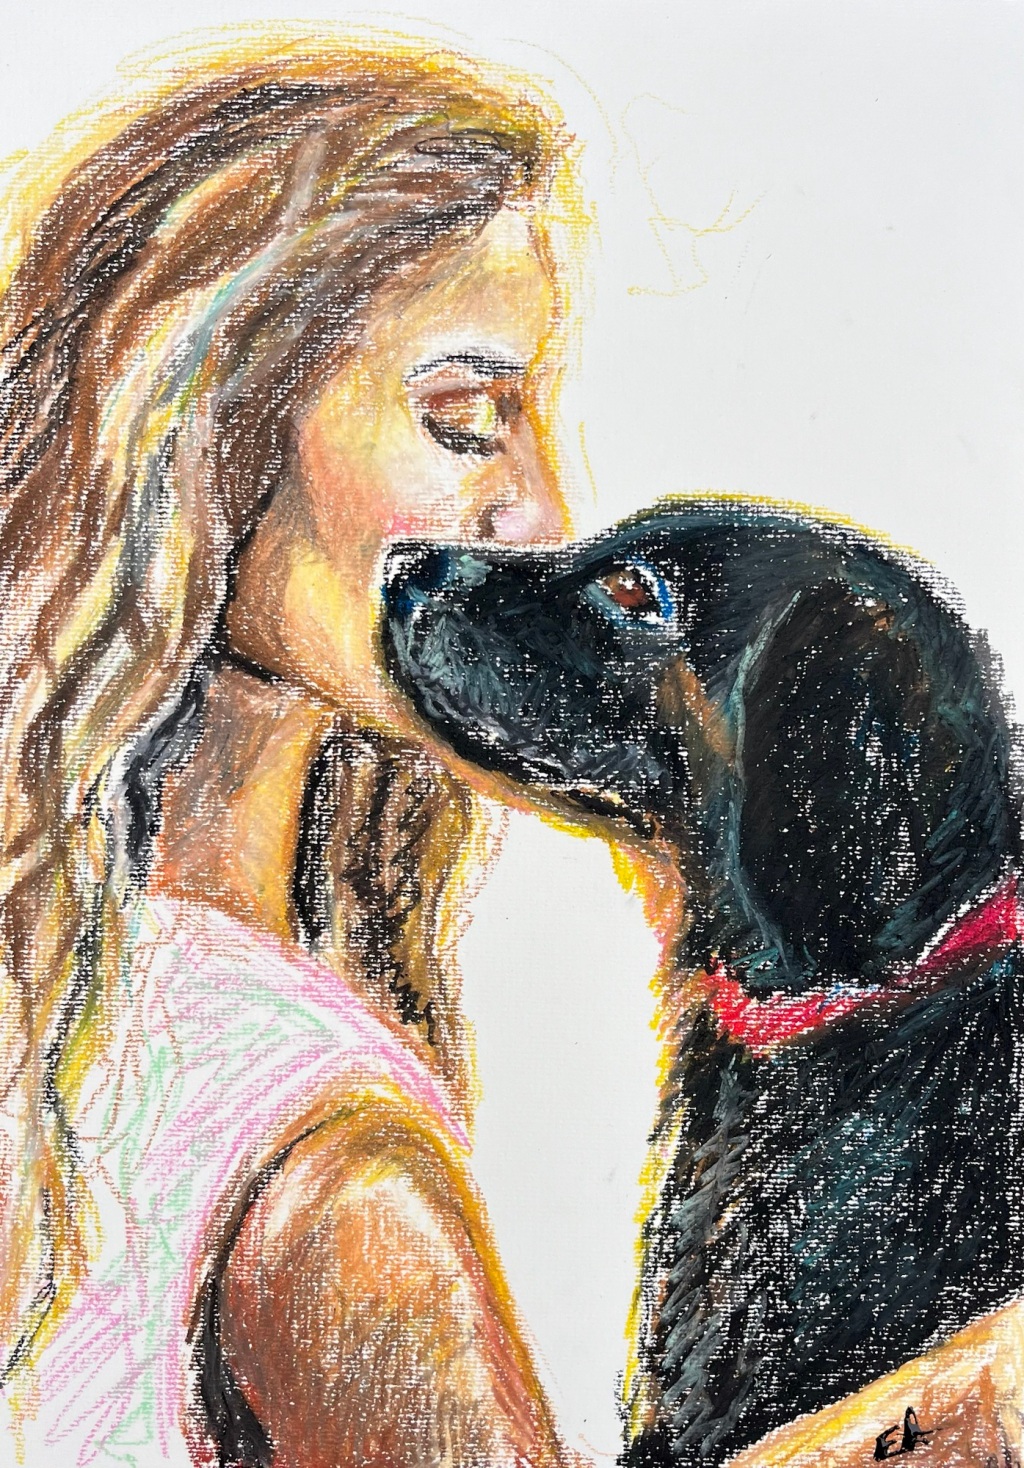 Drawing a woman embracing her dog drenched in sunlight